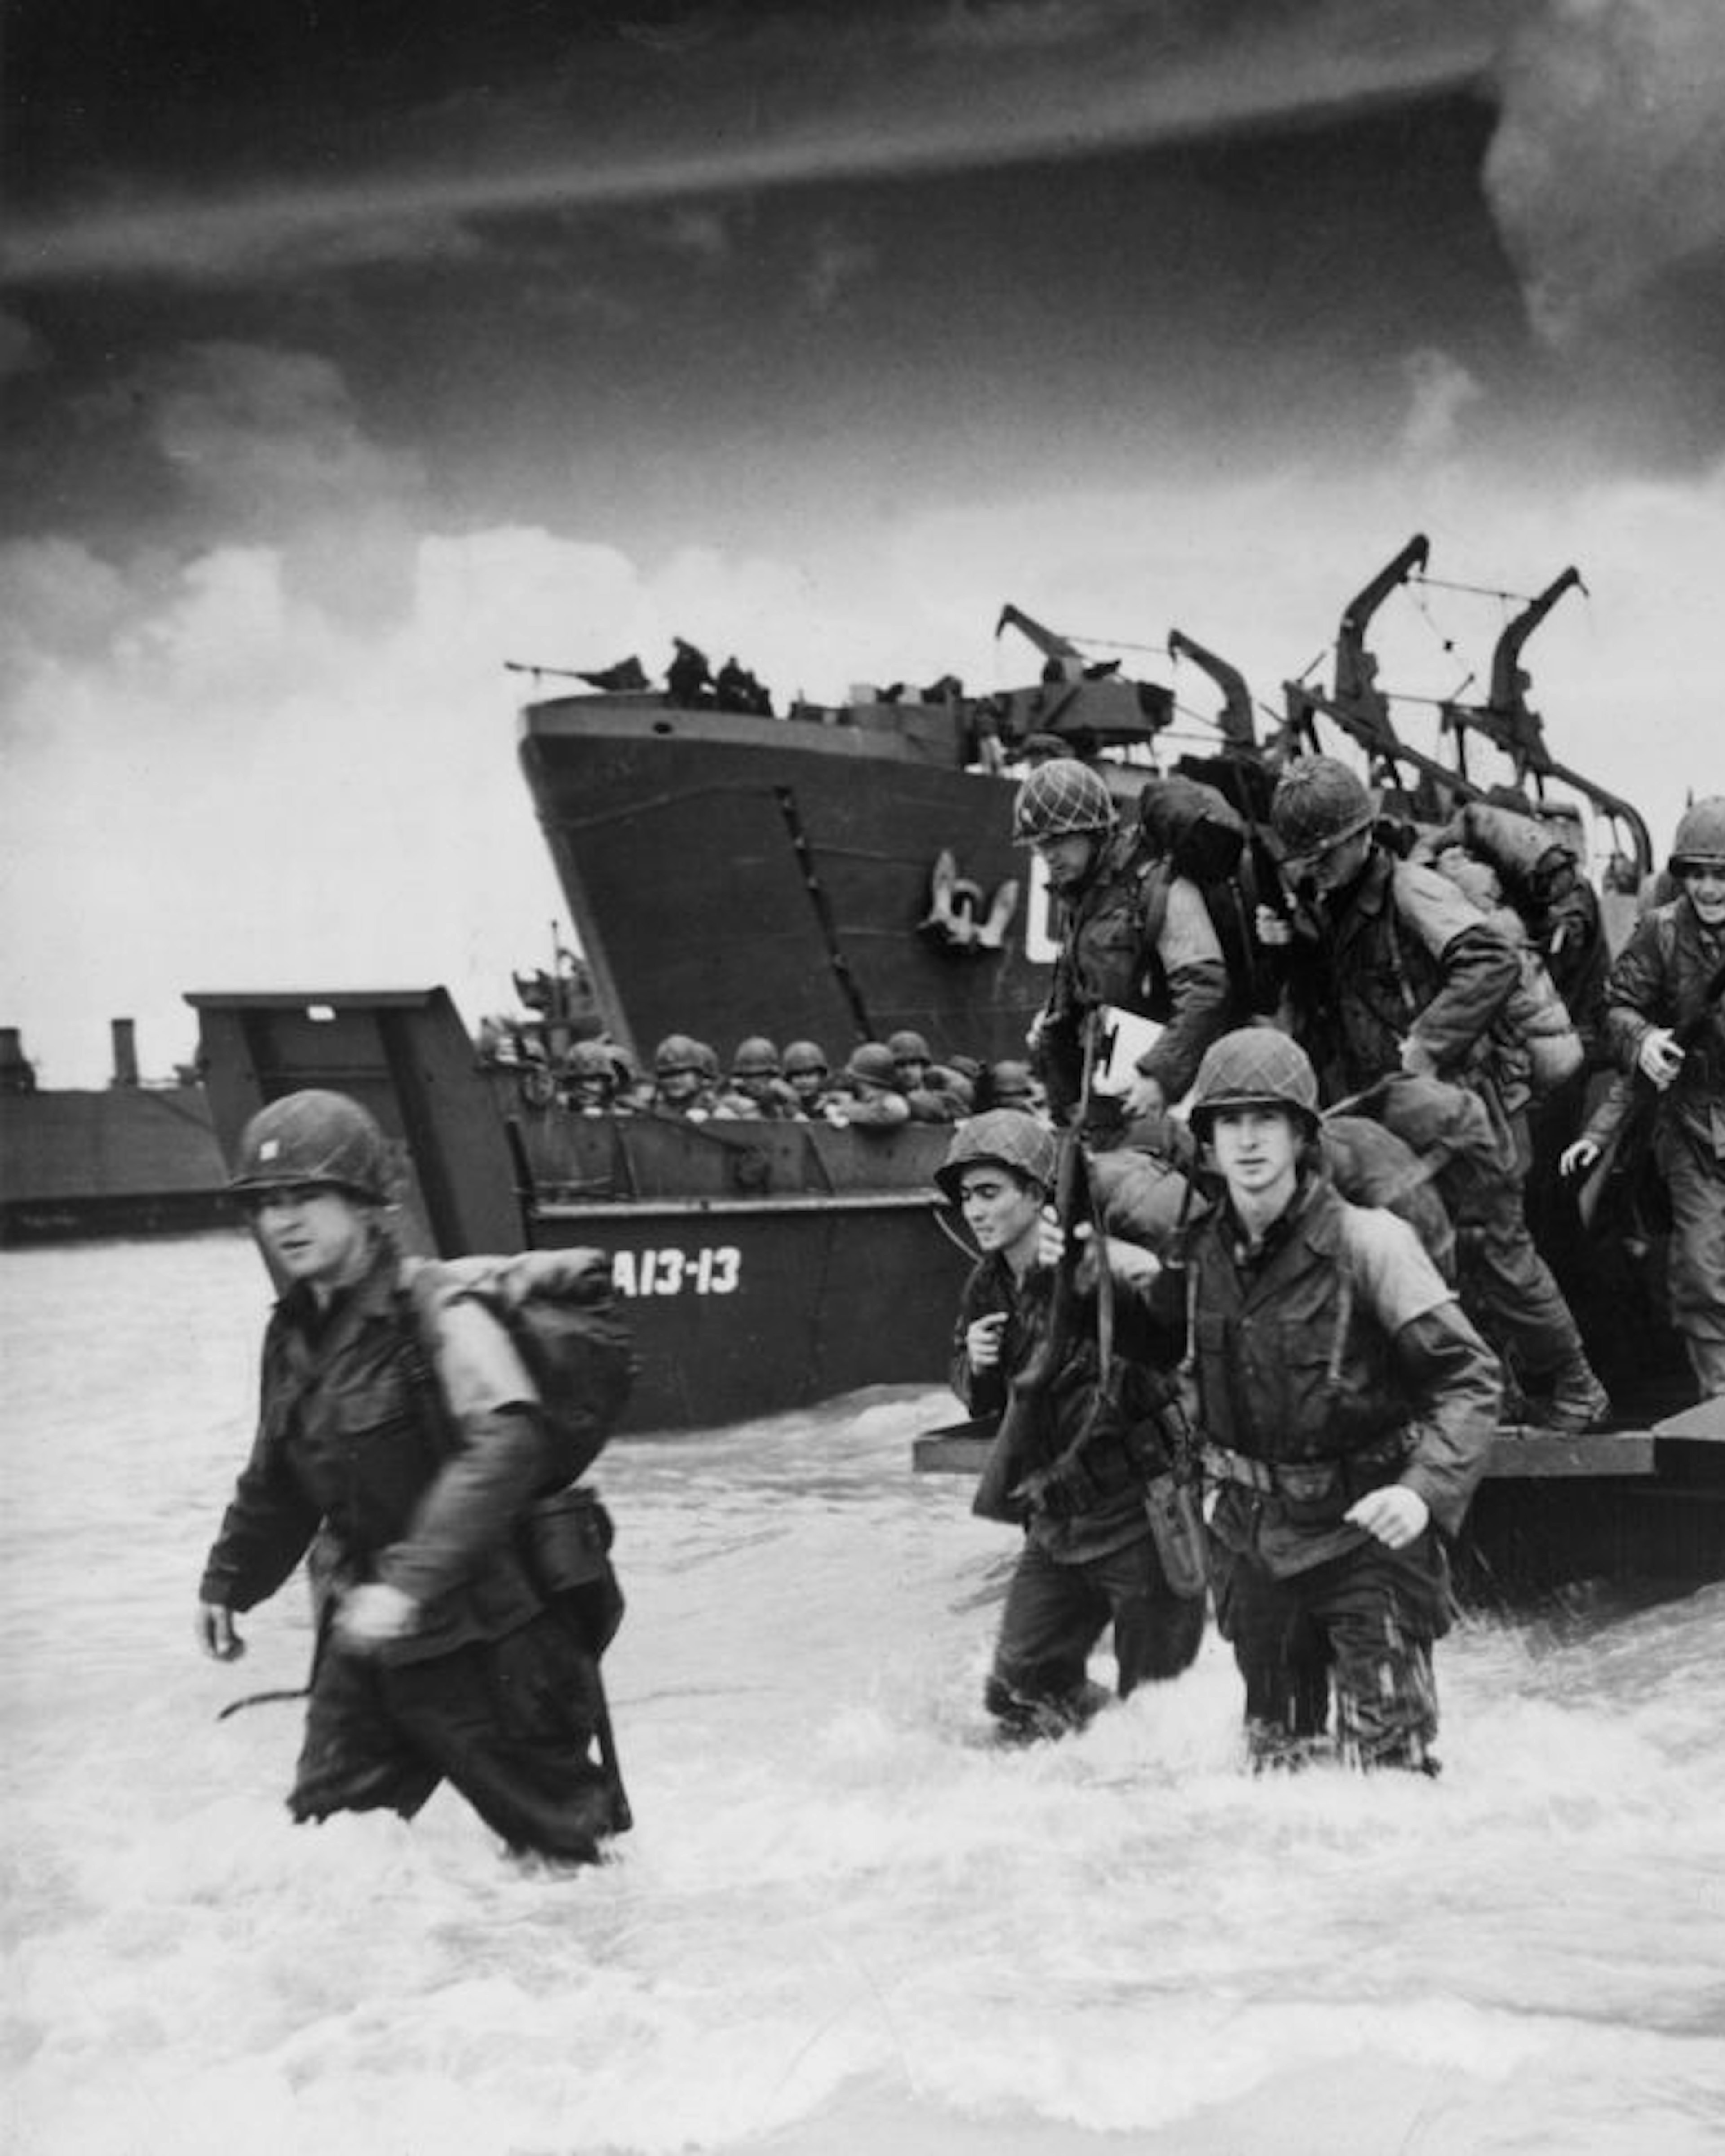 6th June 1944: Reinforcements disembarking from a landing barge at Normandy during the Allied Invasion of France on D-Day. (Photo by Hulton Archive/Getty Images)